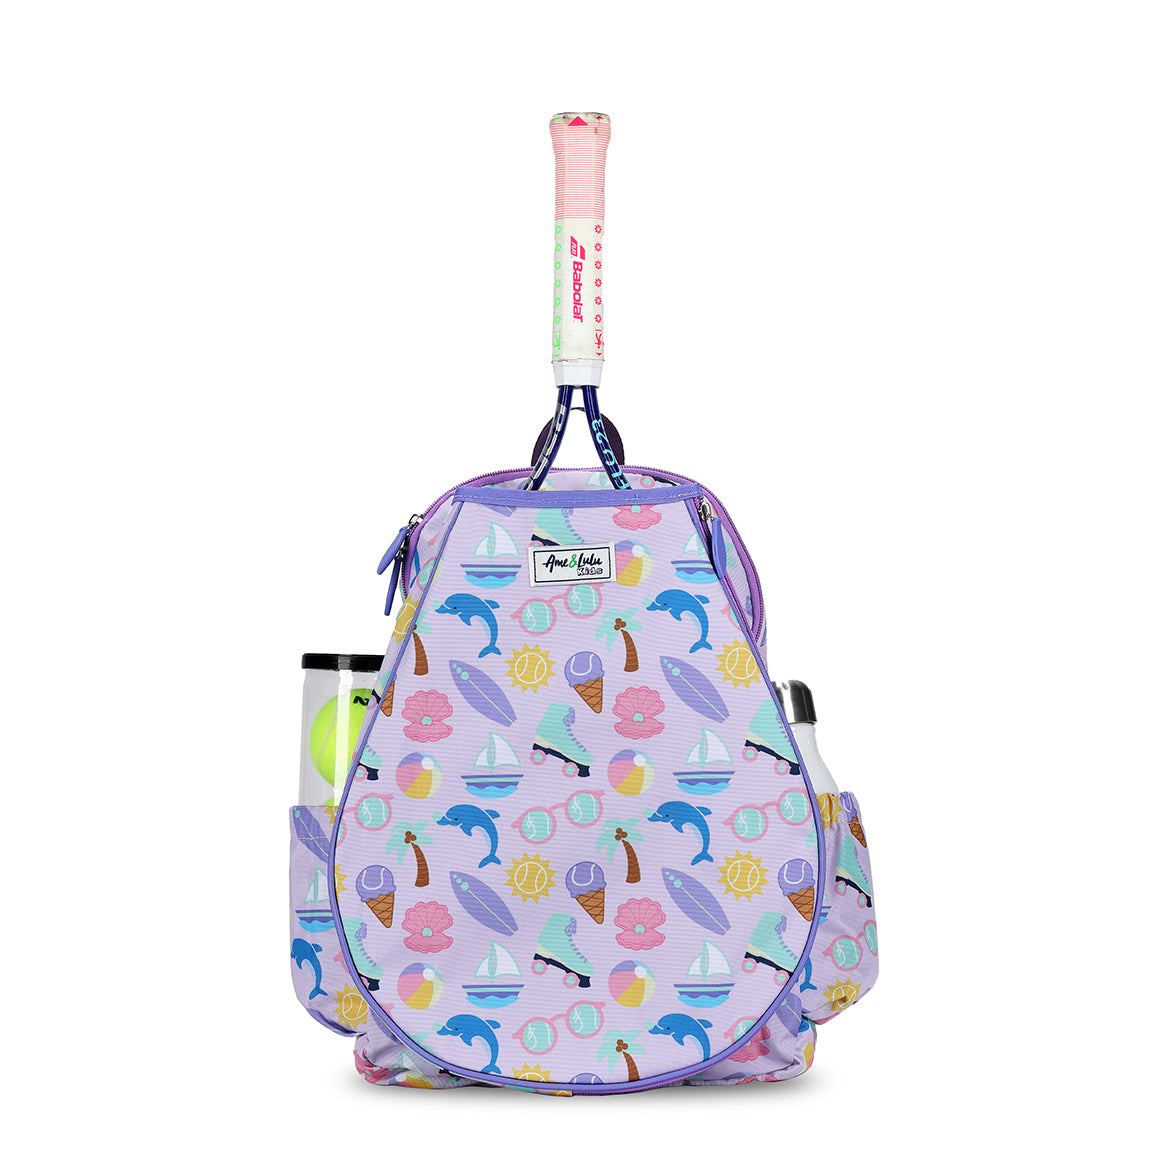 Front view of purple kids tennis backpack. Backpack is covered in beach themed icons such as surfboard, boats, beach ball and palm trees.